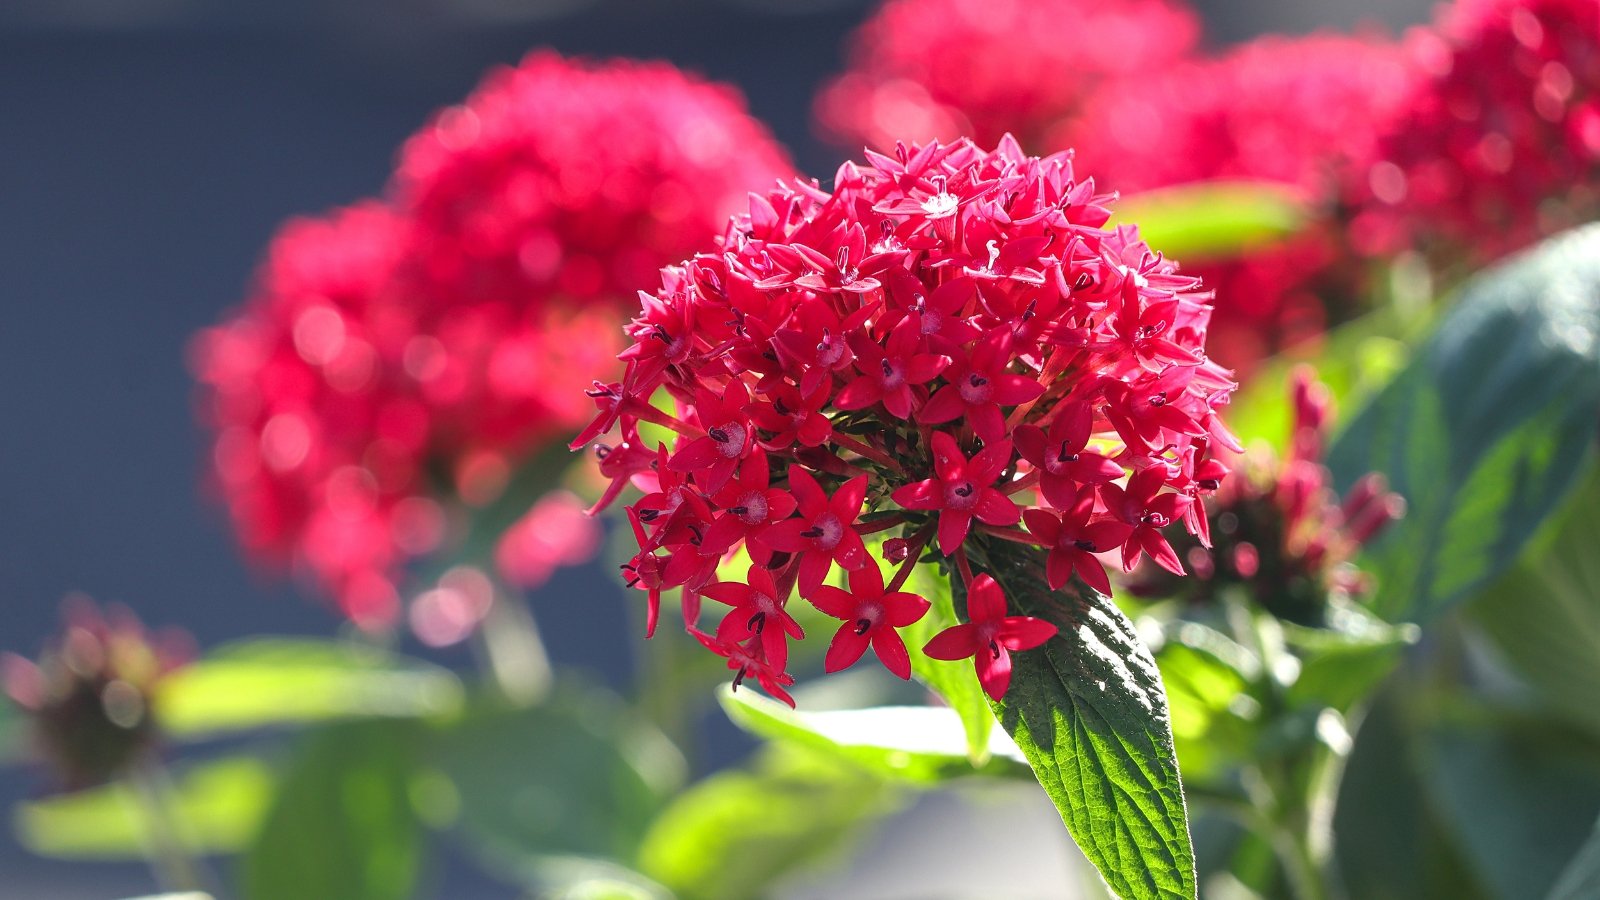 Pentas lanceolata showcases slender stems and glossy lance-shaped leaves, topped with spherical clusters of star-shaped flowers in bright pink.